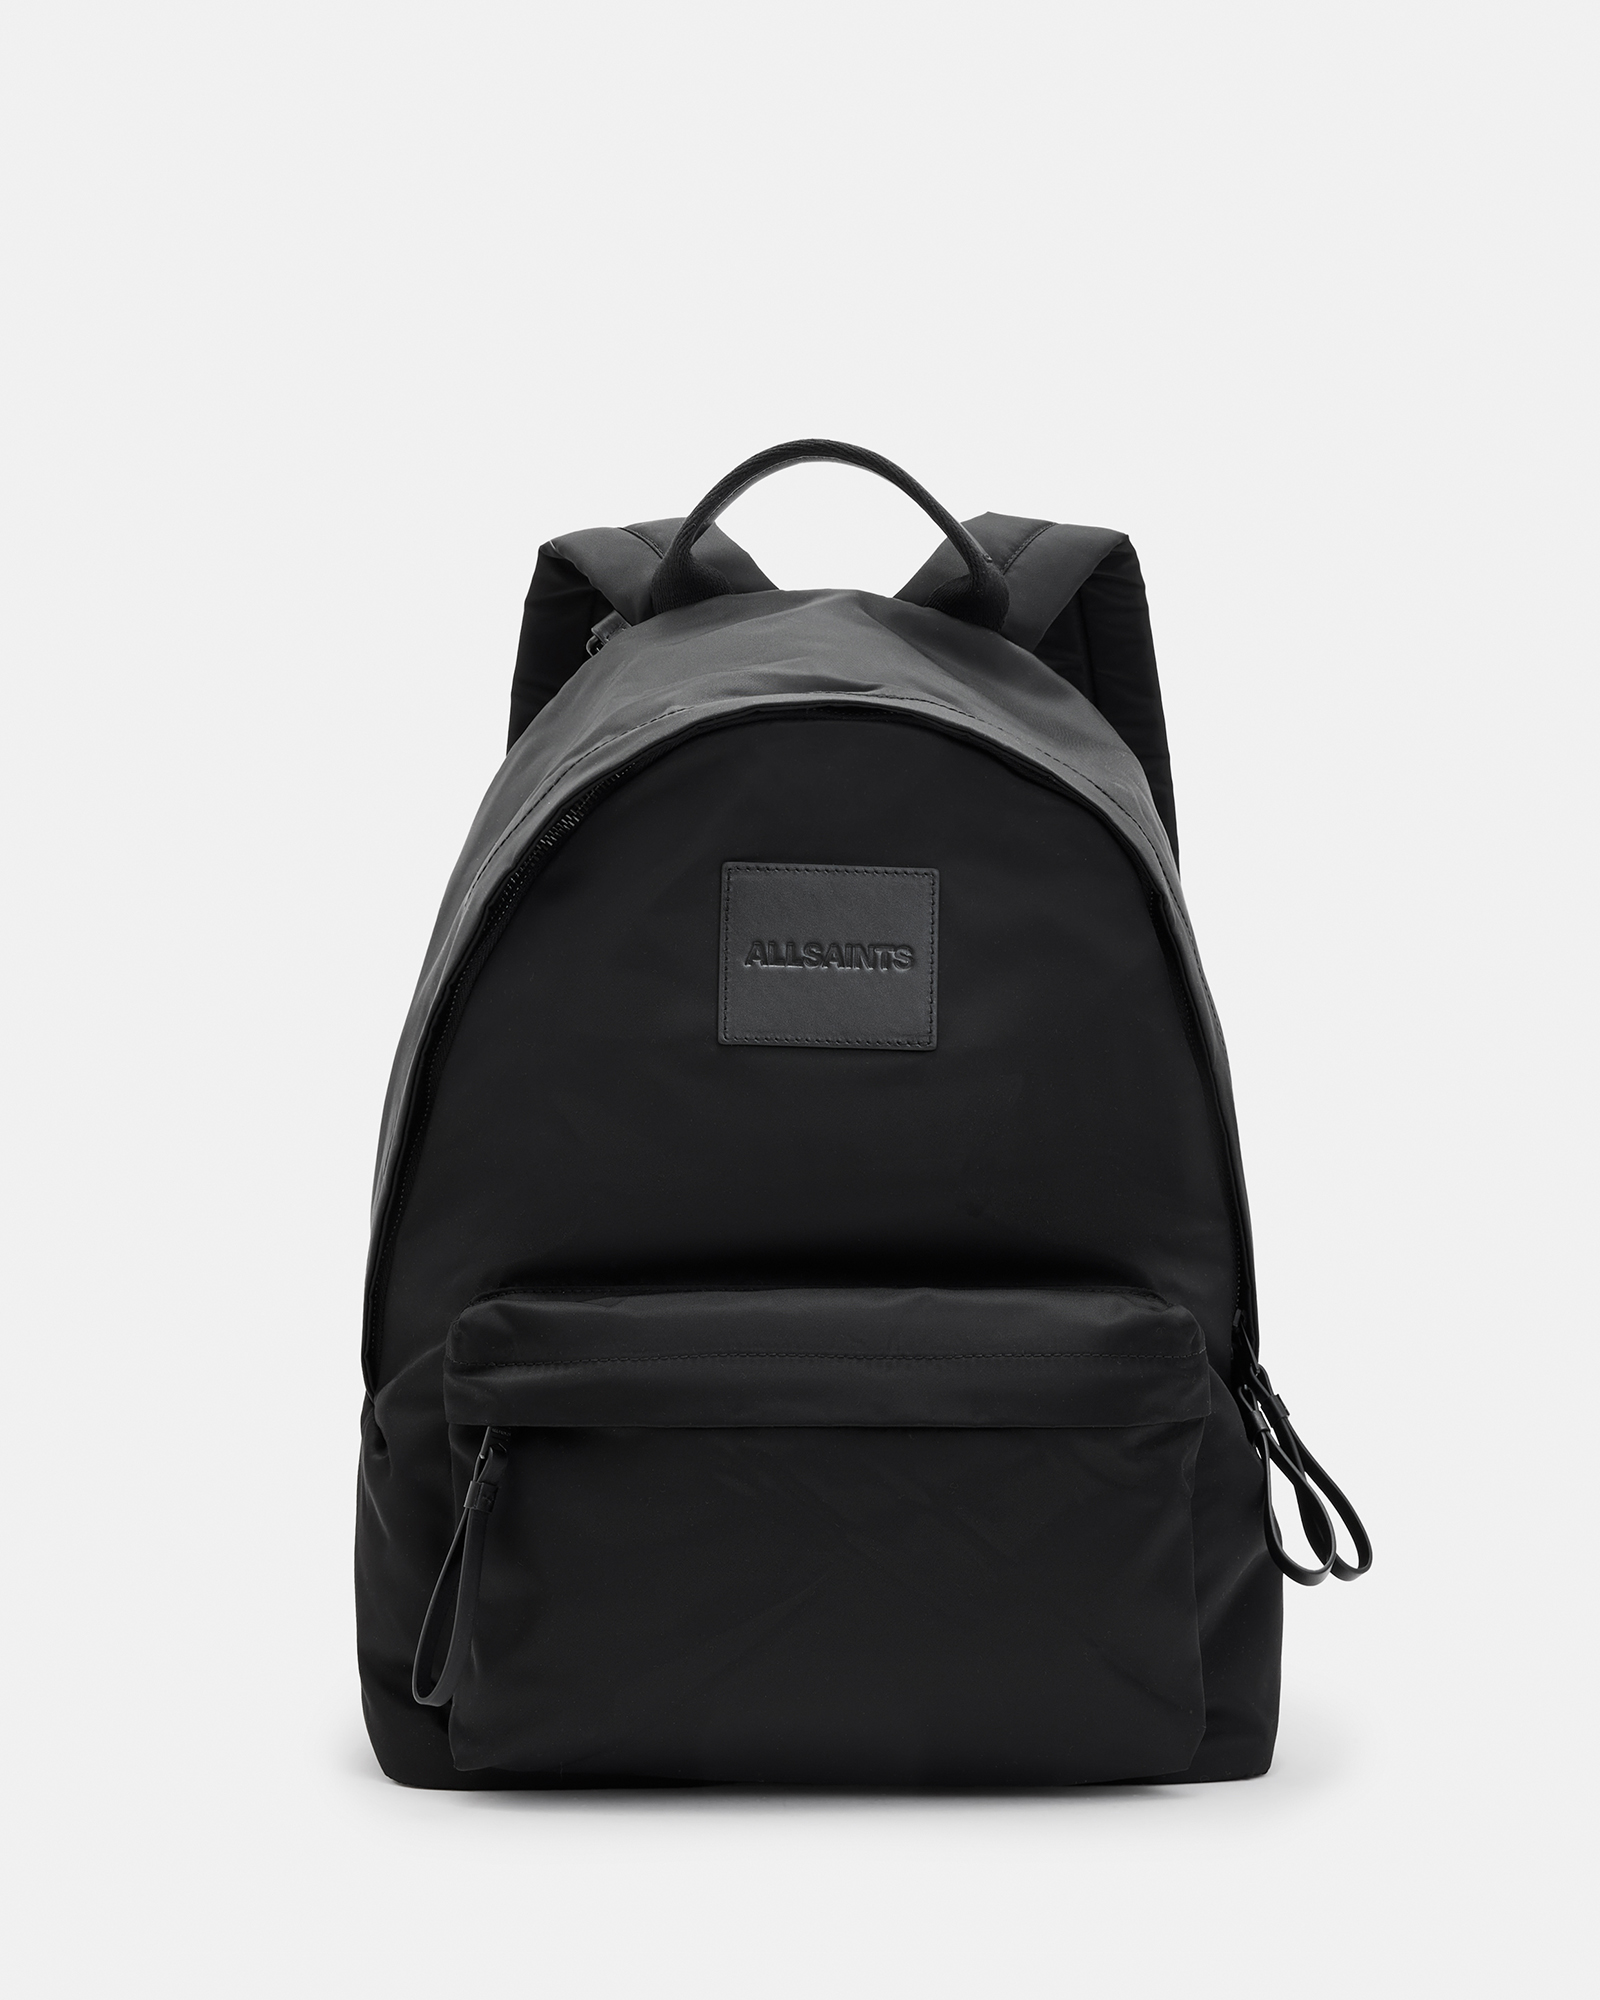 AllSaints Carabiner Recycled Backpack